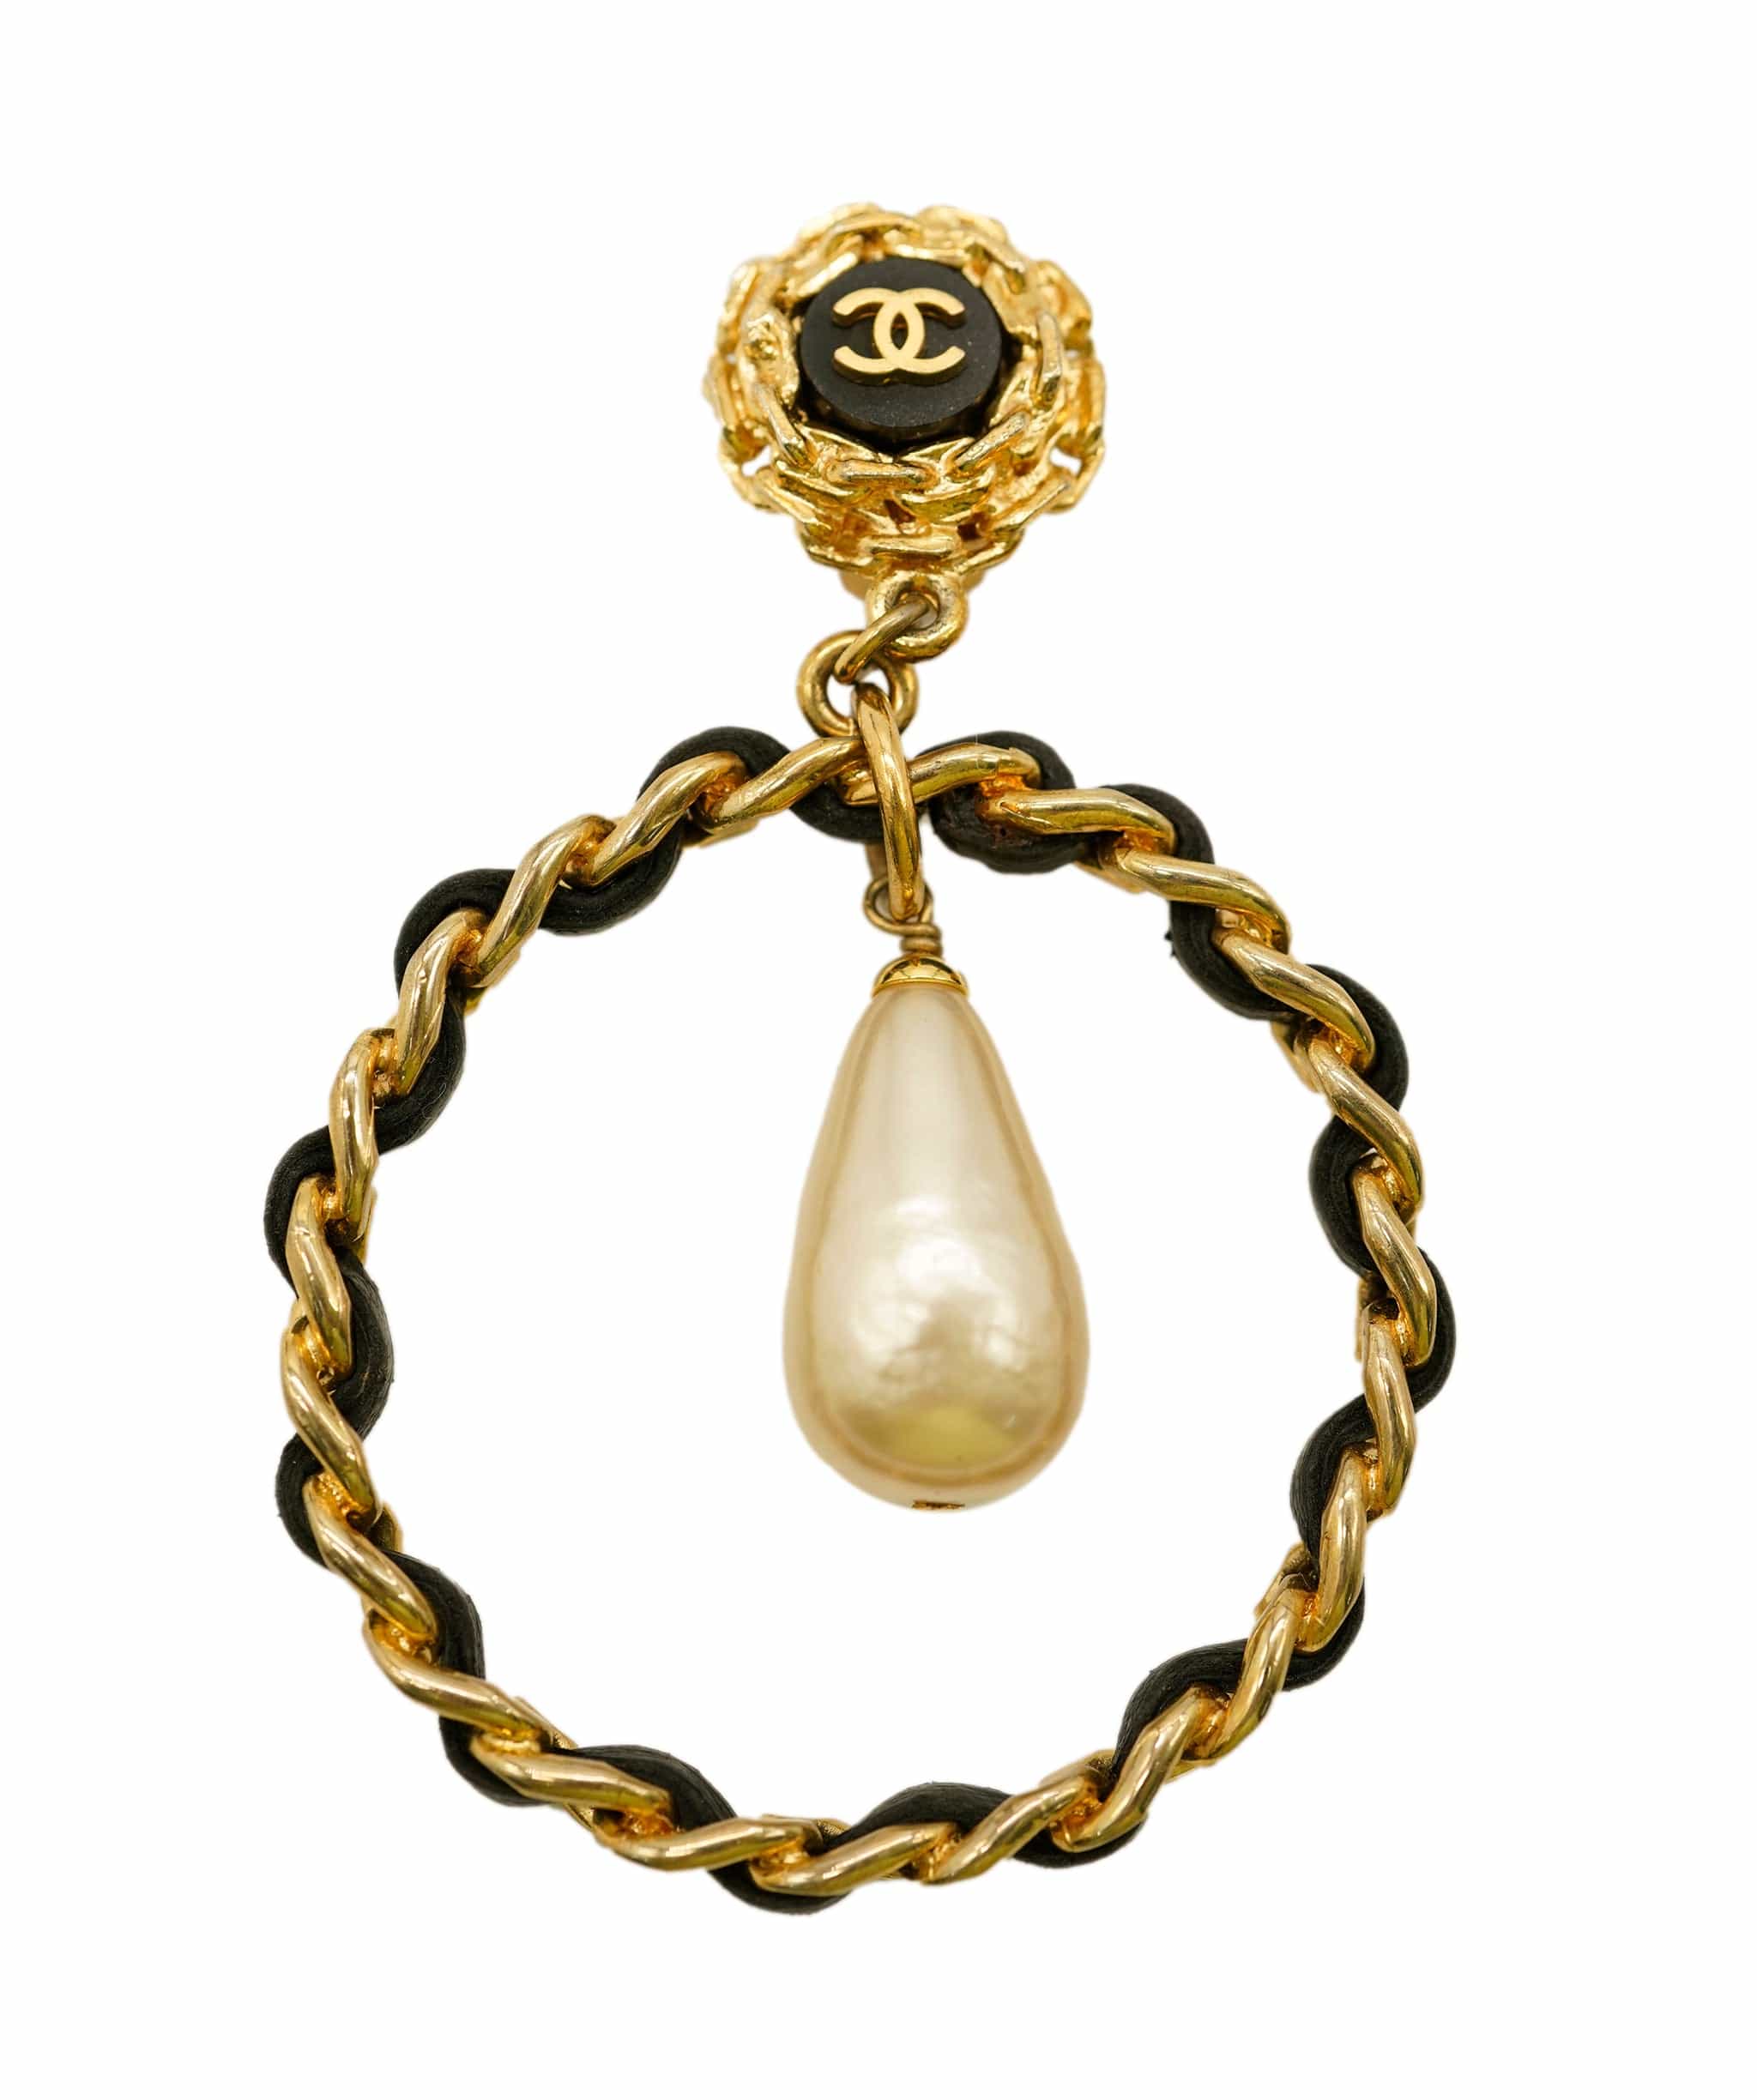 Chanel Vintage Chanel Haute Couture Runway Collection GRIPOIX PEARL Clip On Earrings - ASL2234